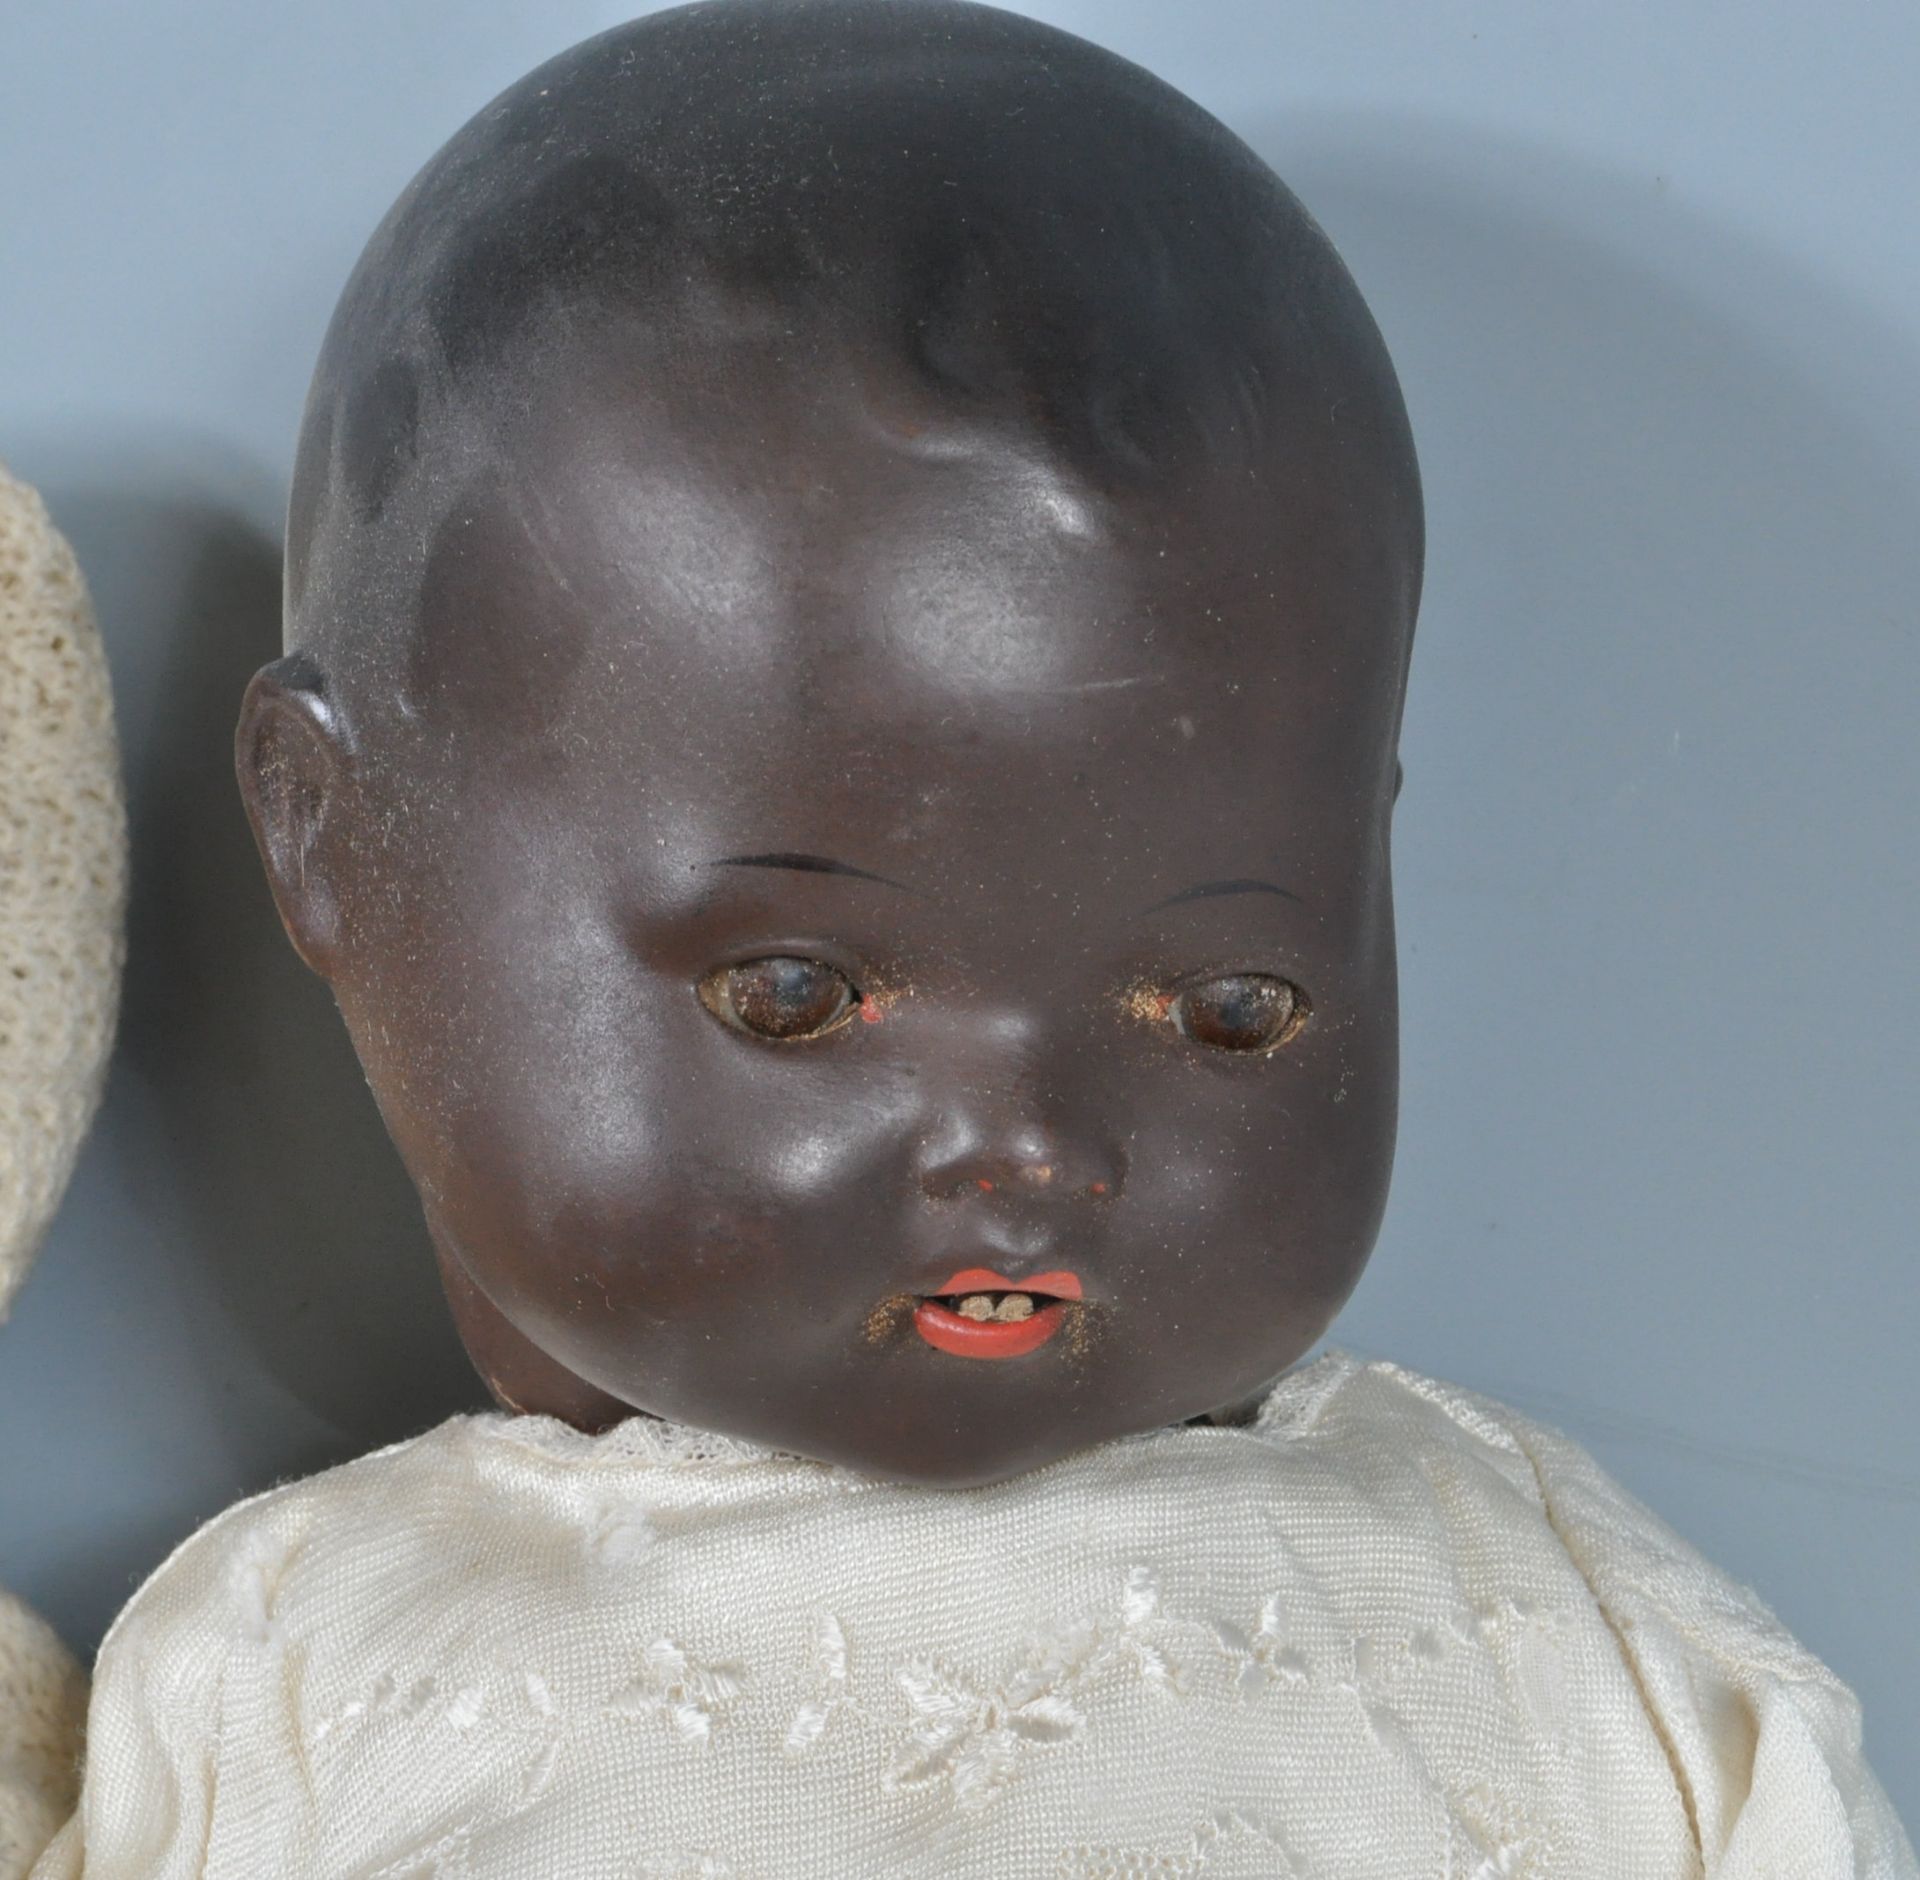 COLLECTION OF FIVE EARLY 20TH CENTURY 1930S CHILDRENS DOLLS - Image 7 of 8